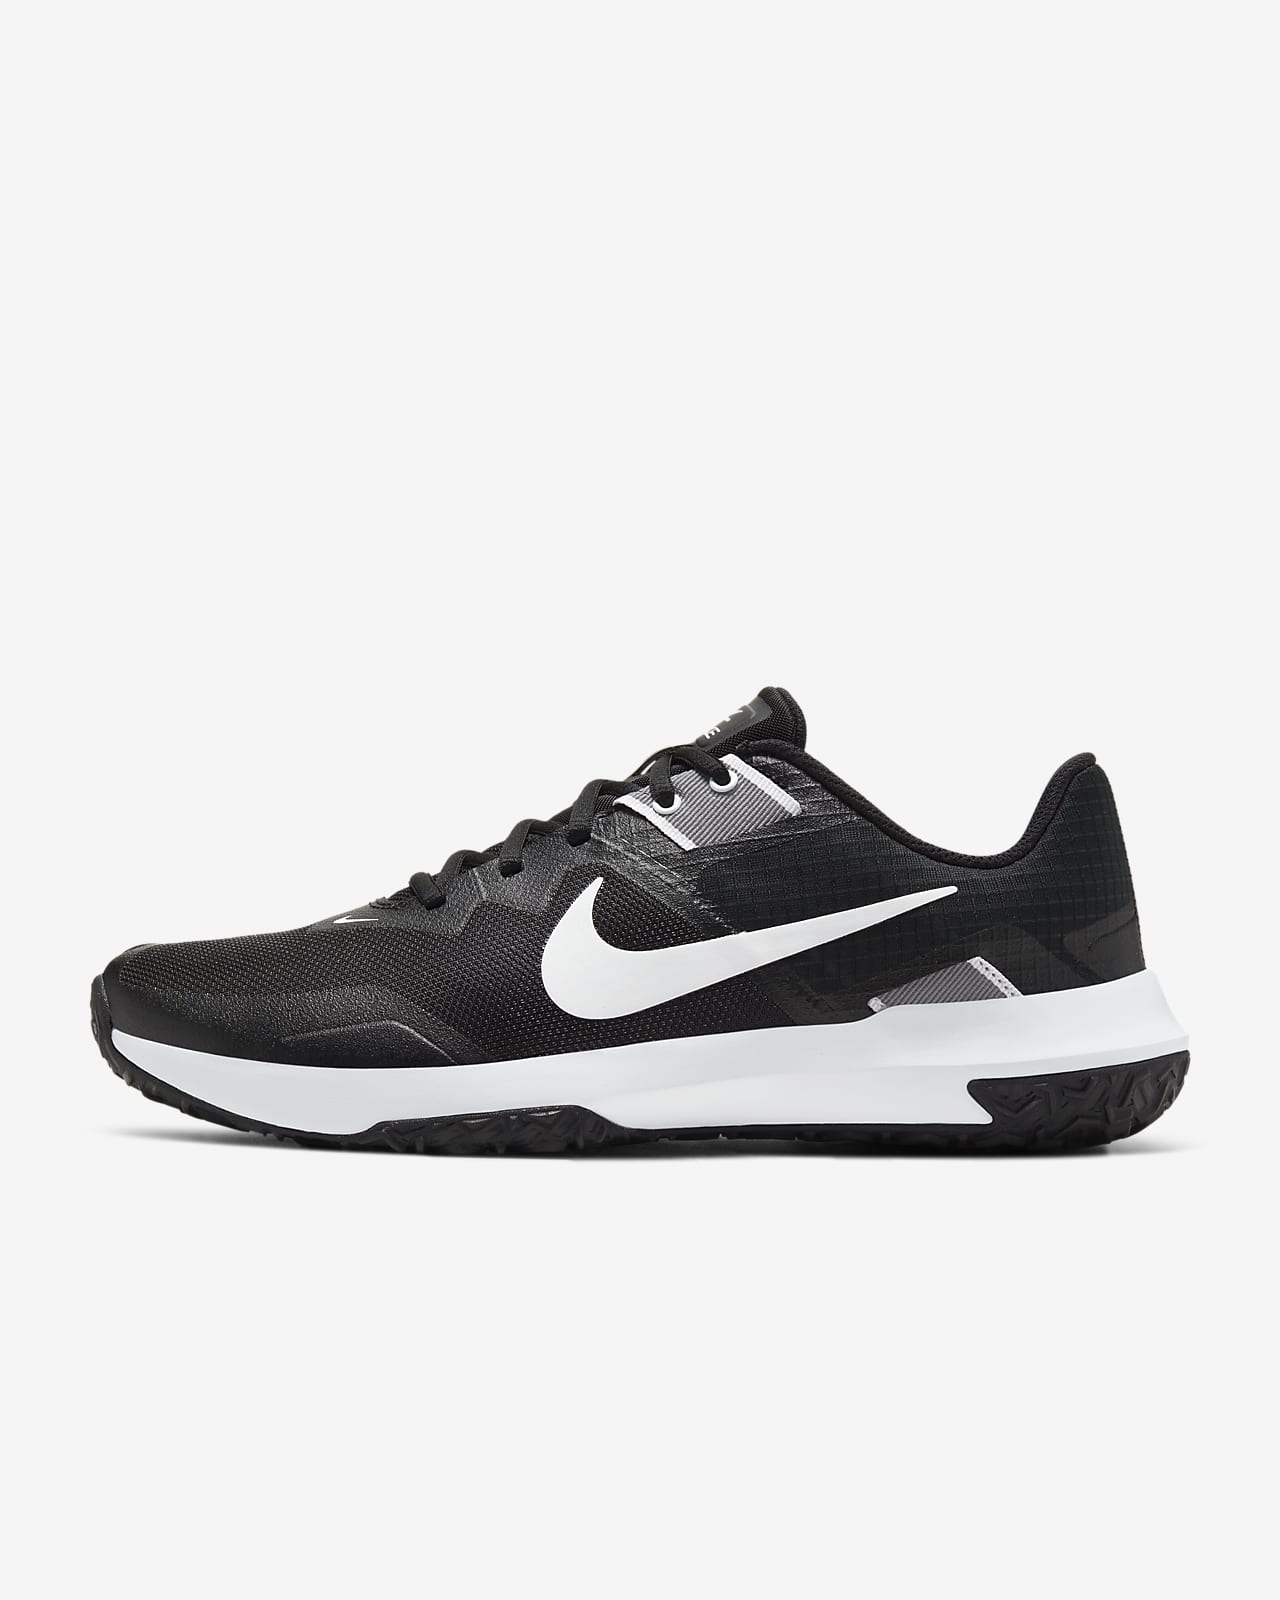 nike varsity compete trainer shoes